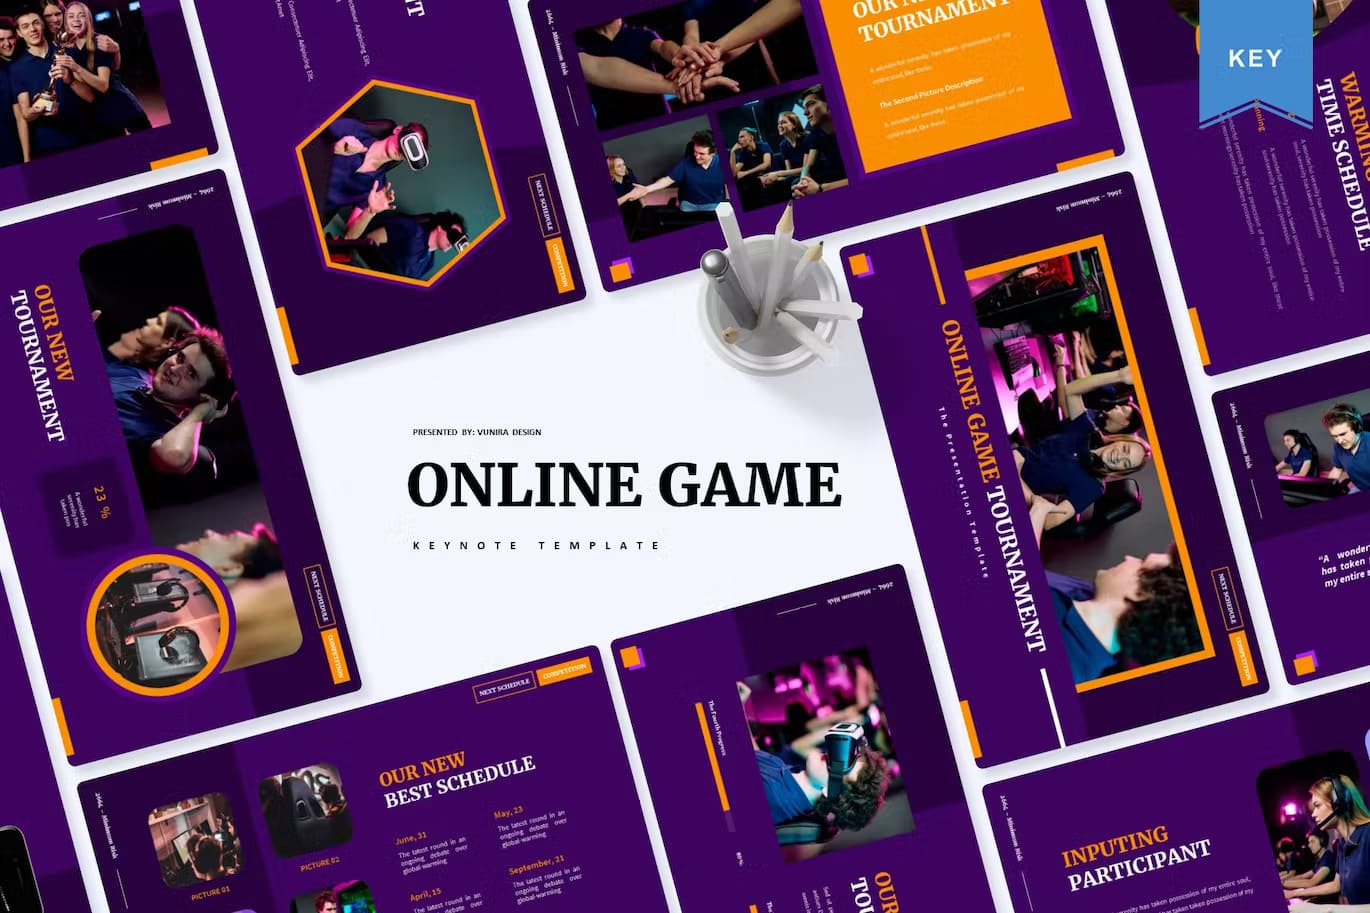 Inputing participant of Online Game Tournament | Keynote Template.